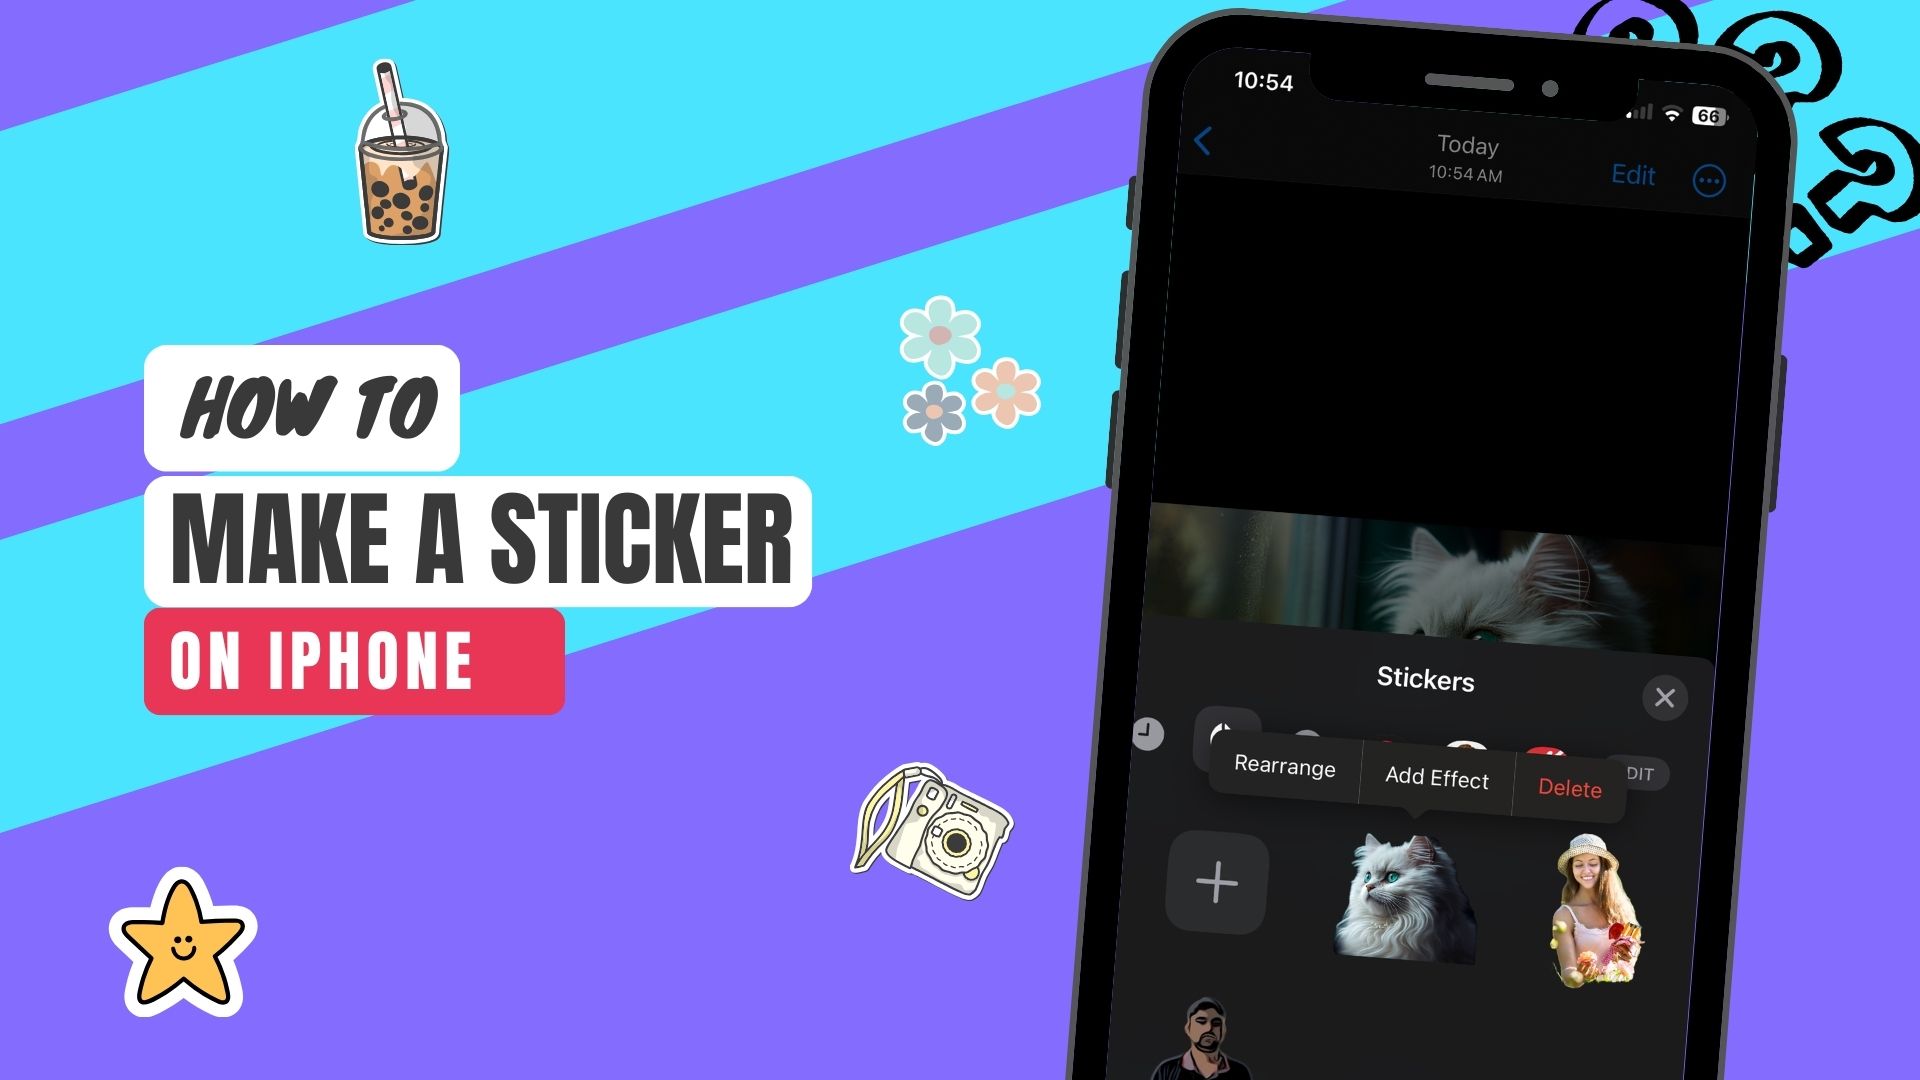 How to Make a Sticker on iPhone [Full Guide]